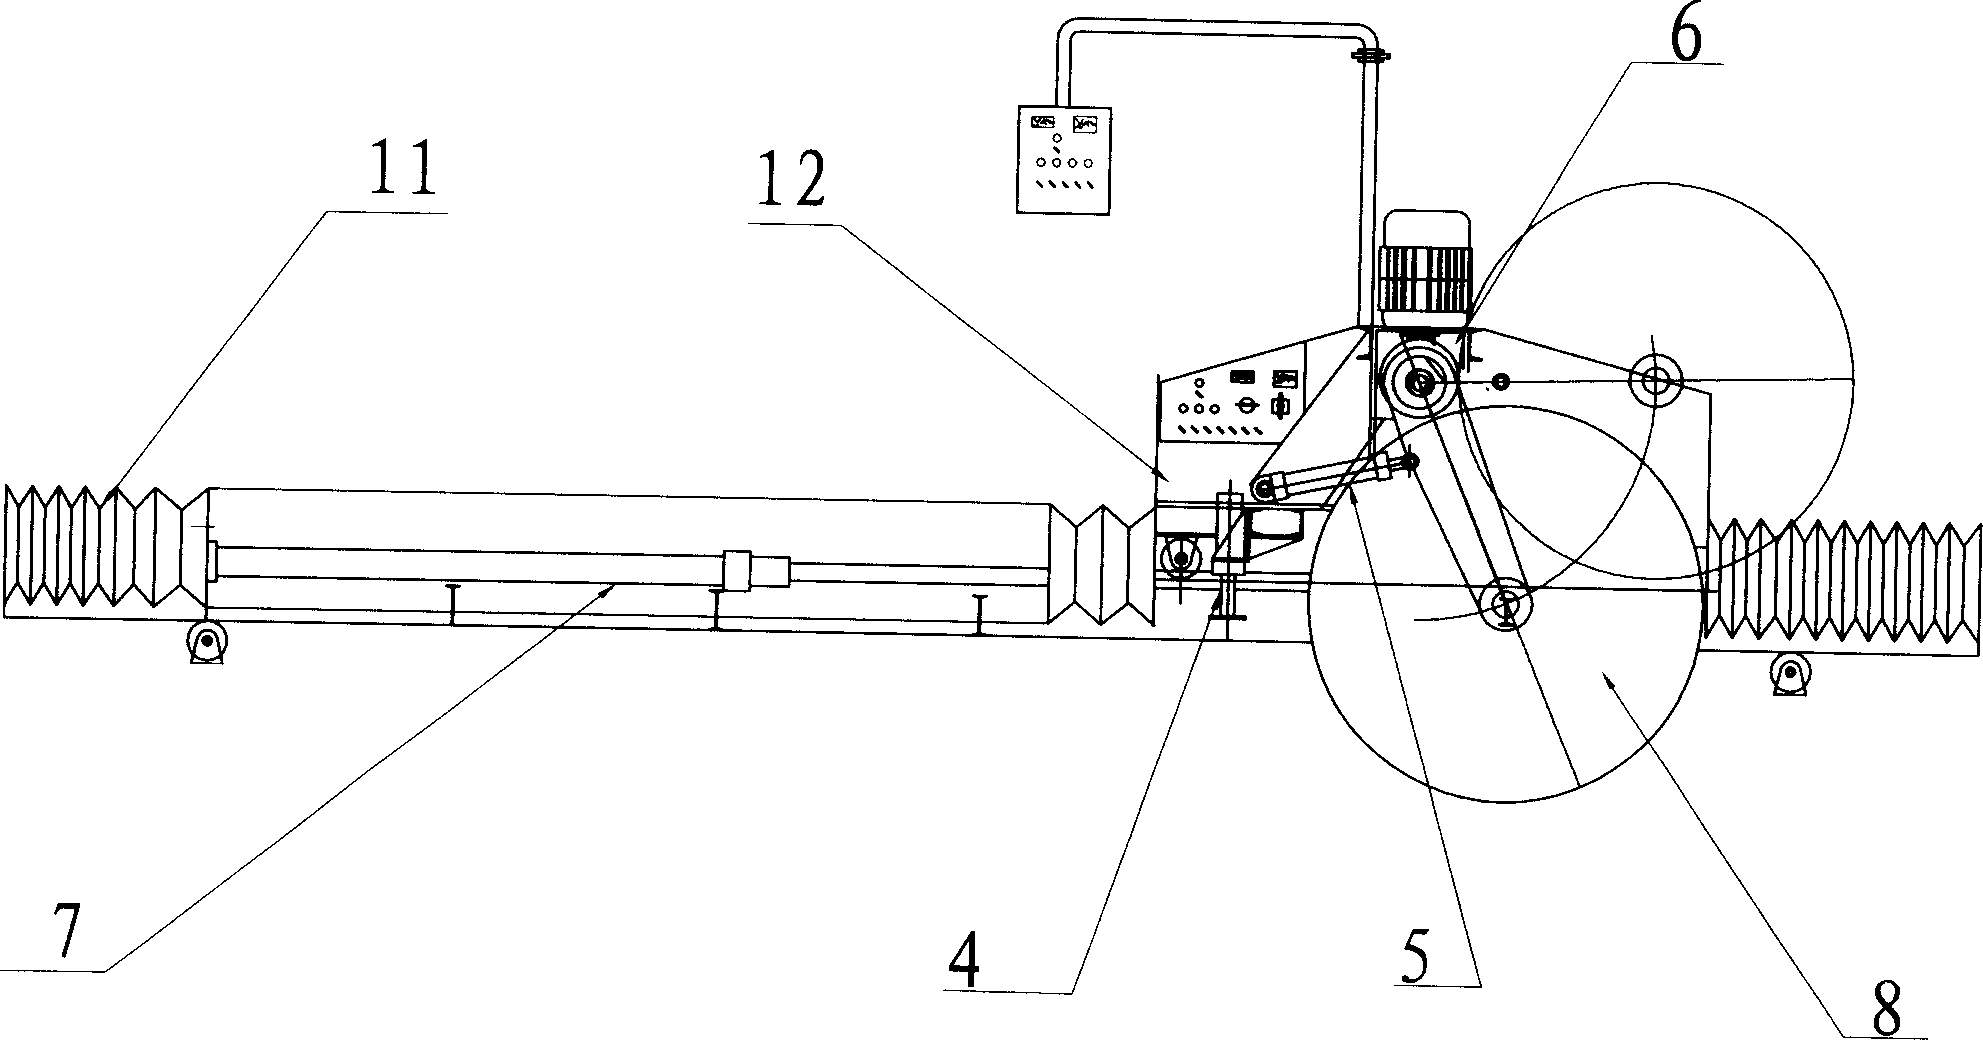 Technique for mining specified dimension stone in stone quarry directly and cutting apparatus